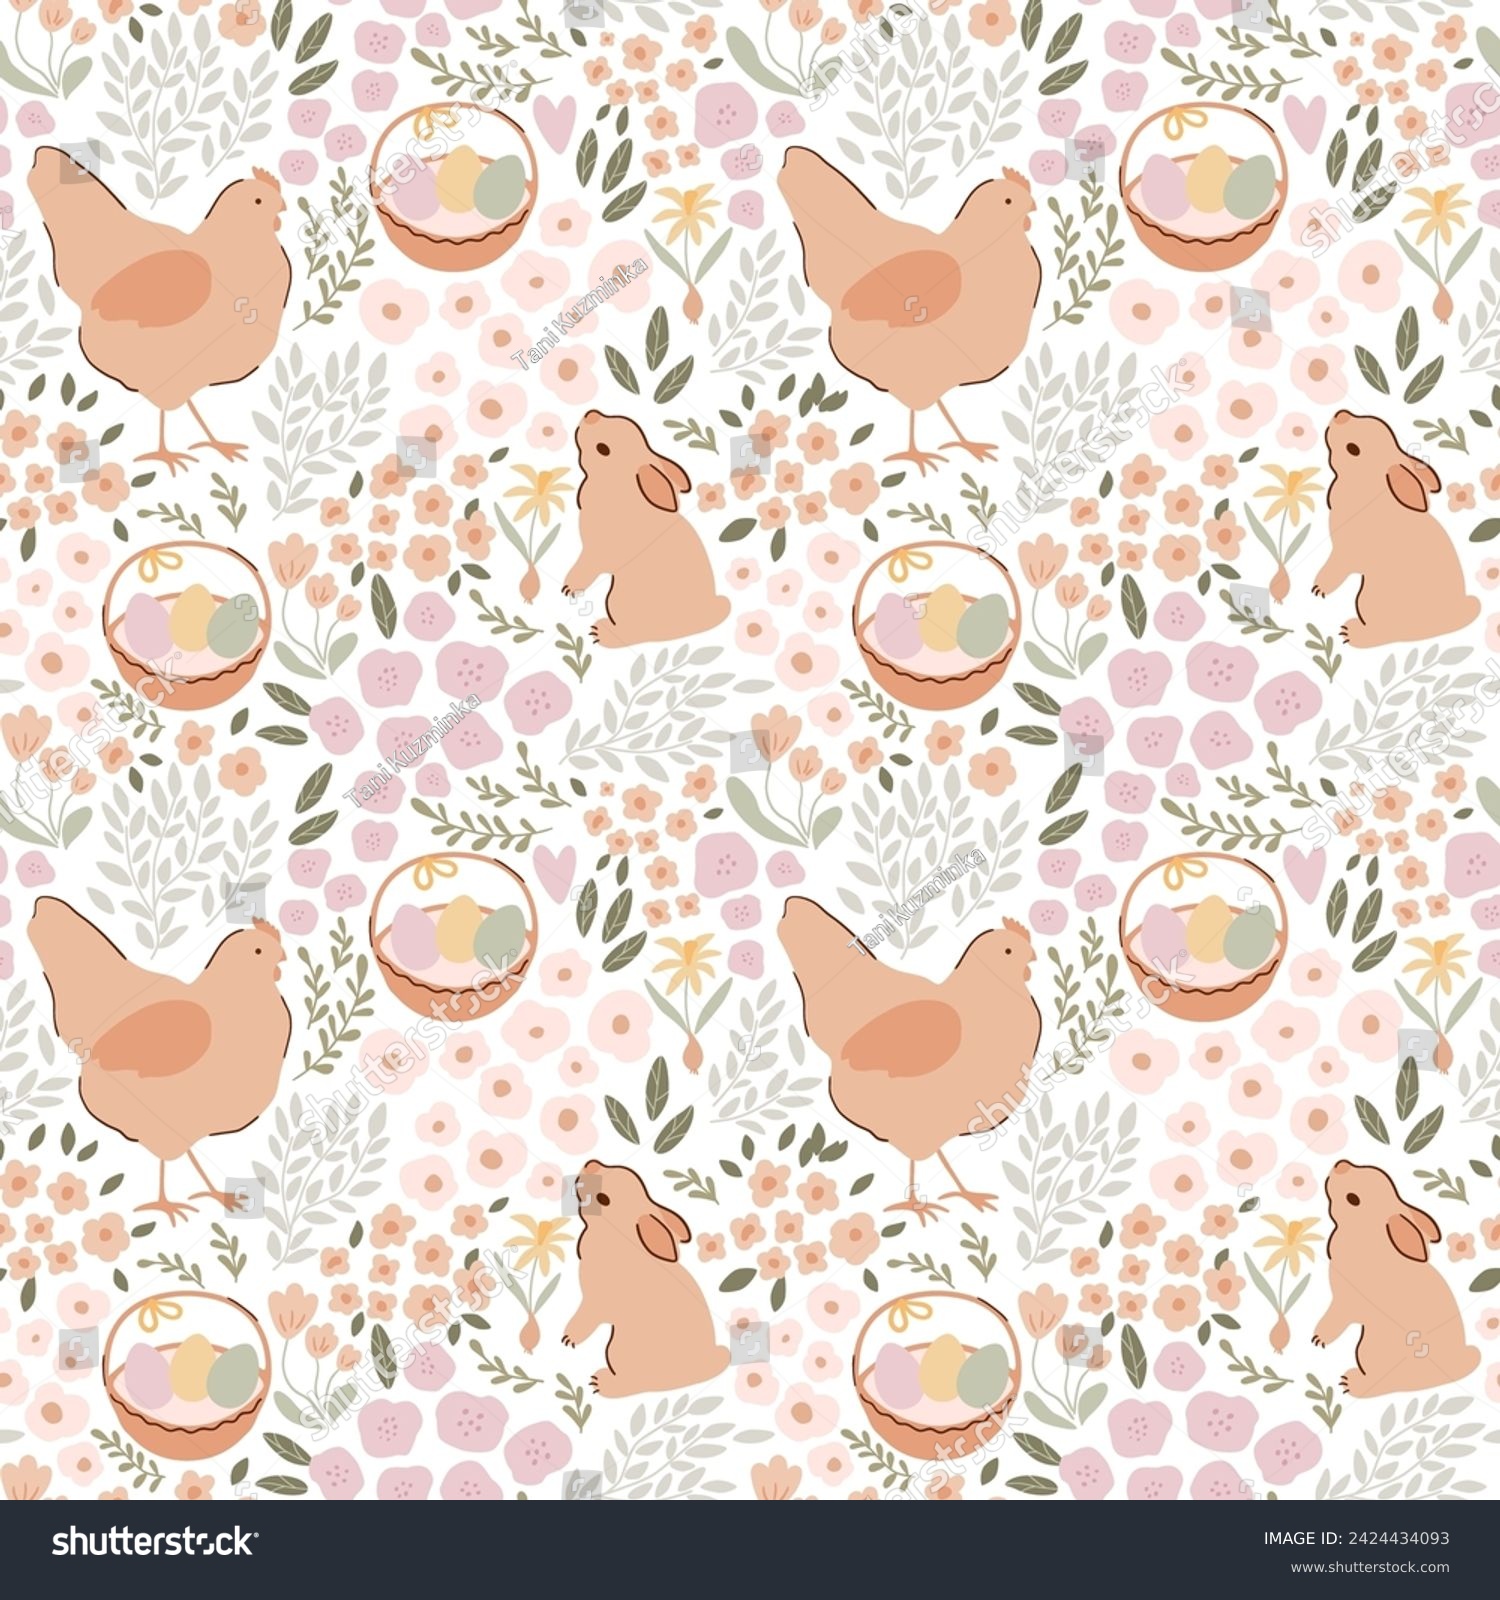 Gentle beige floral Easter bunny, hen, eggs in basket seamless pattern. Cute baby rabbit, tiny flowers, spring field. Pastel farm animal repeat background fabric cottage core wallpaper, textile design #2424434093